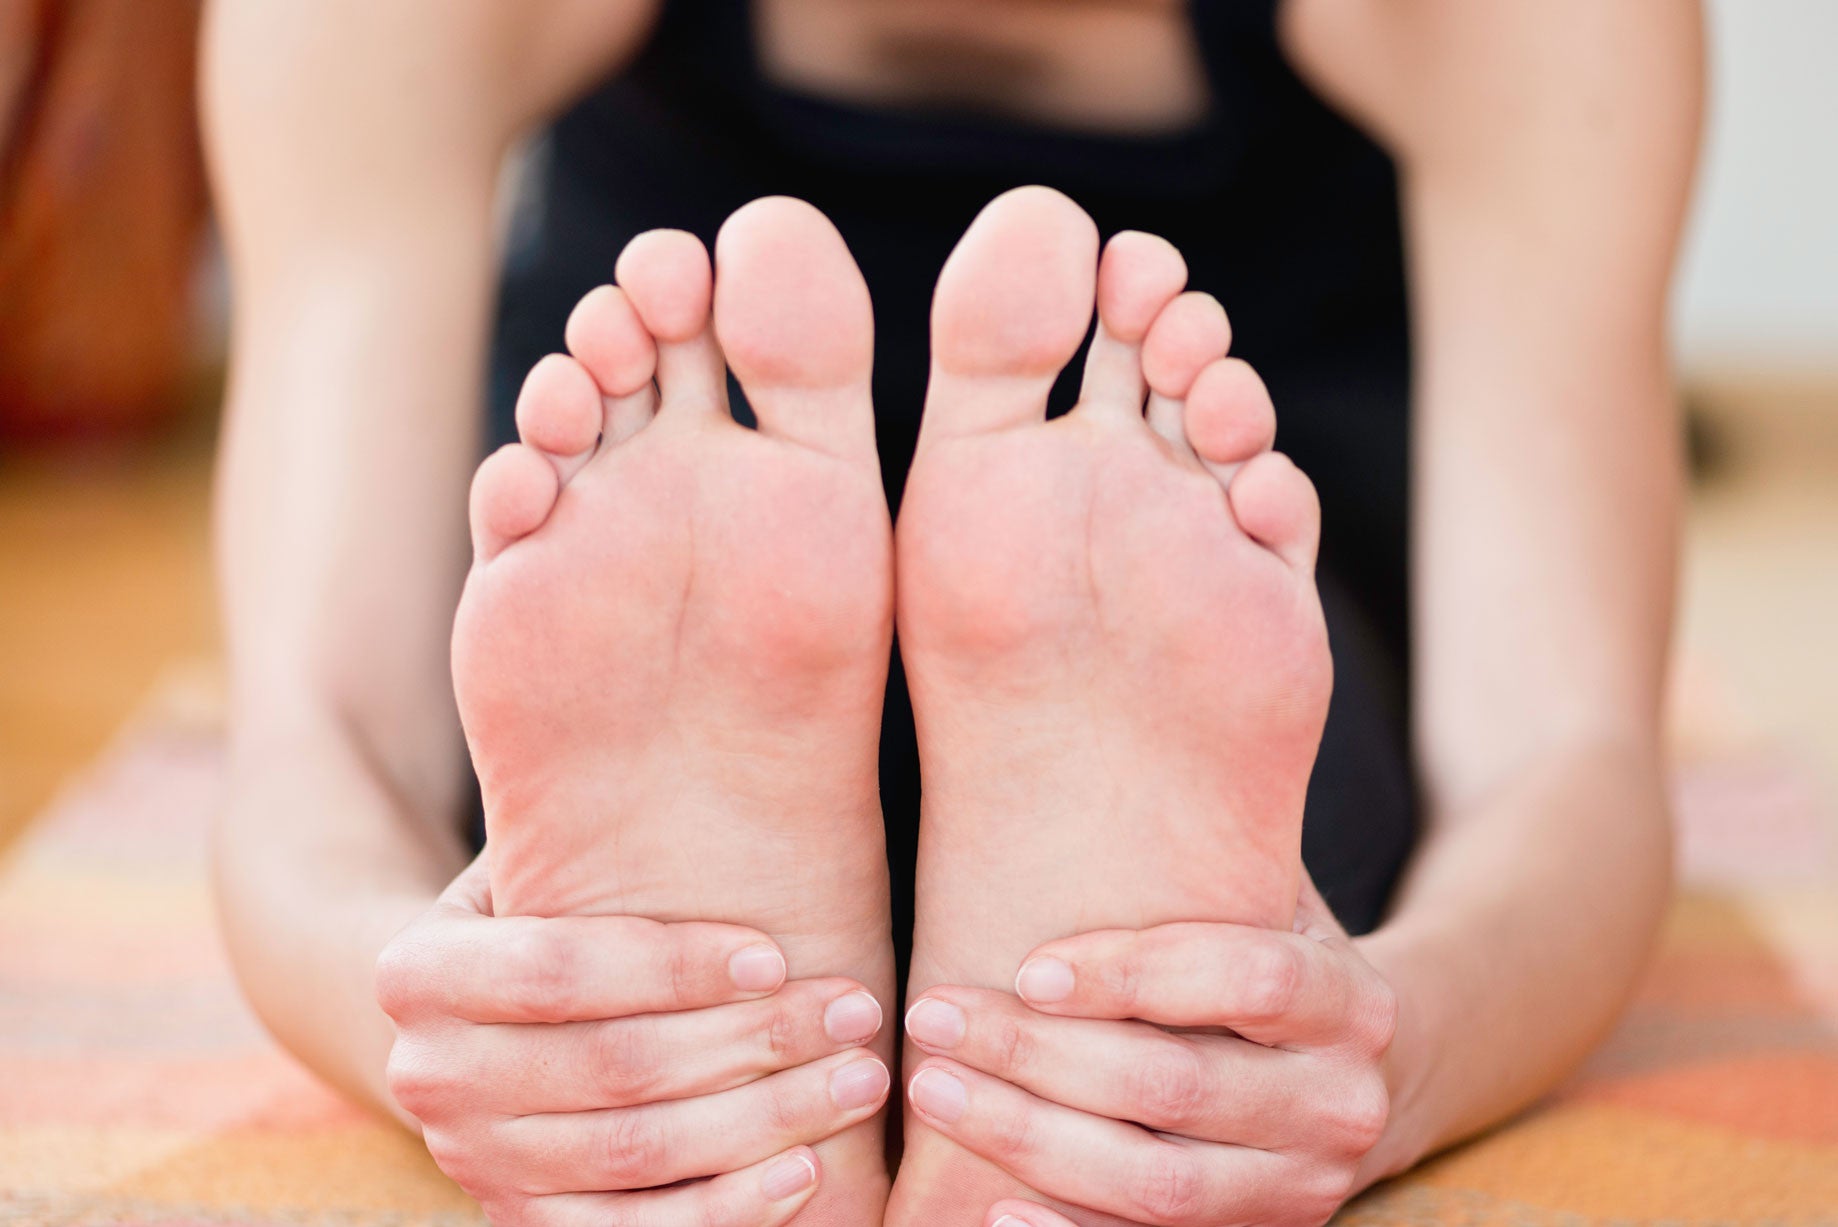 How to Alleviate Foot Pain: 4 Simple Ways to Soothe Your Feet